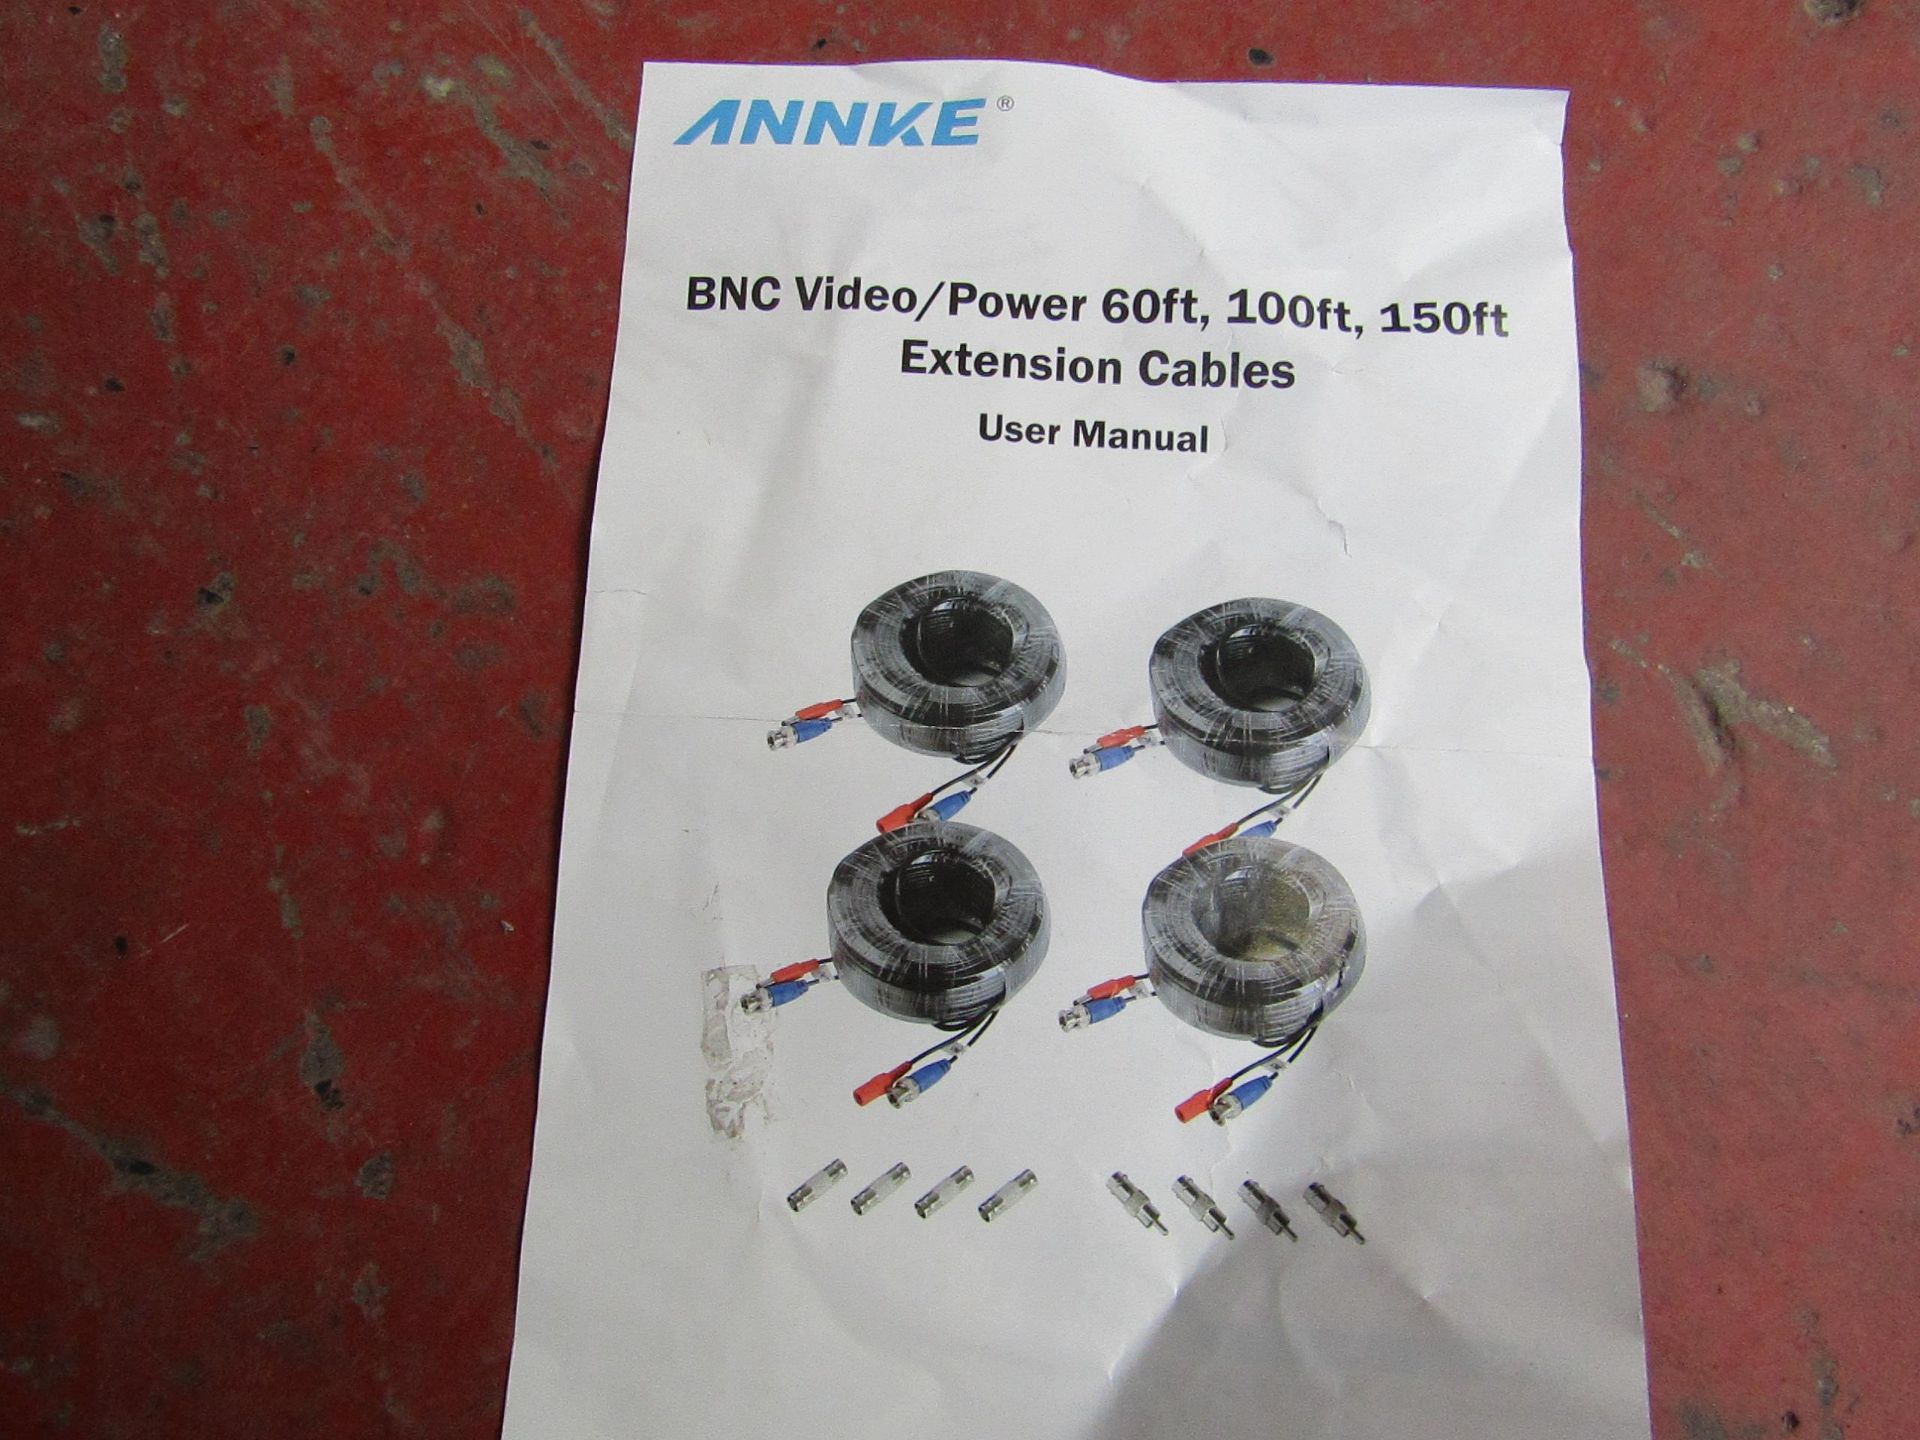 Annke BNC Video/Power 60ft Extension Cables. New.